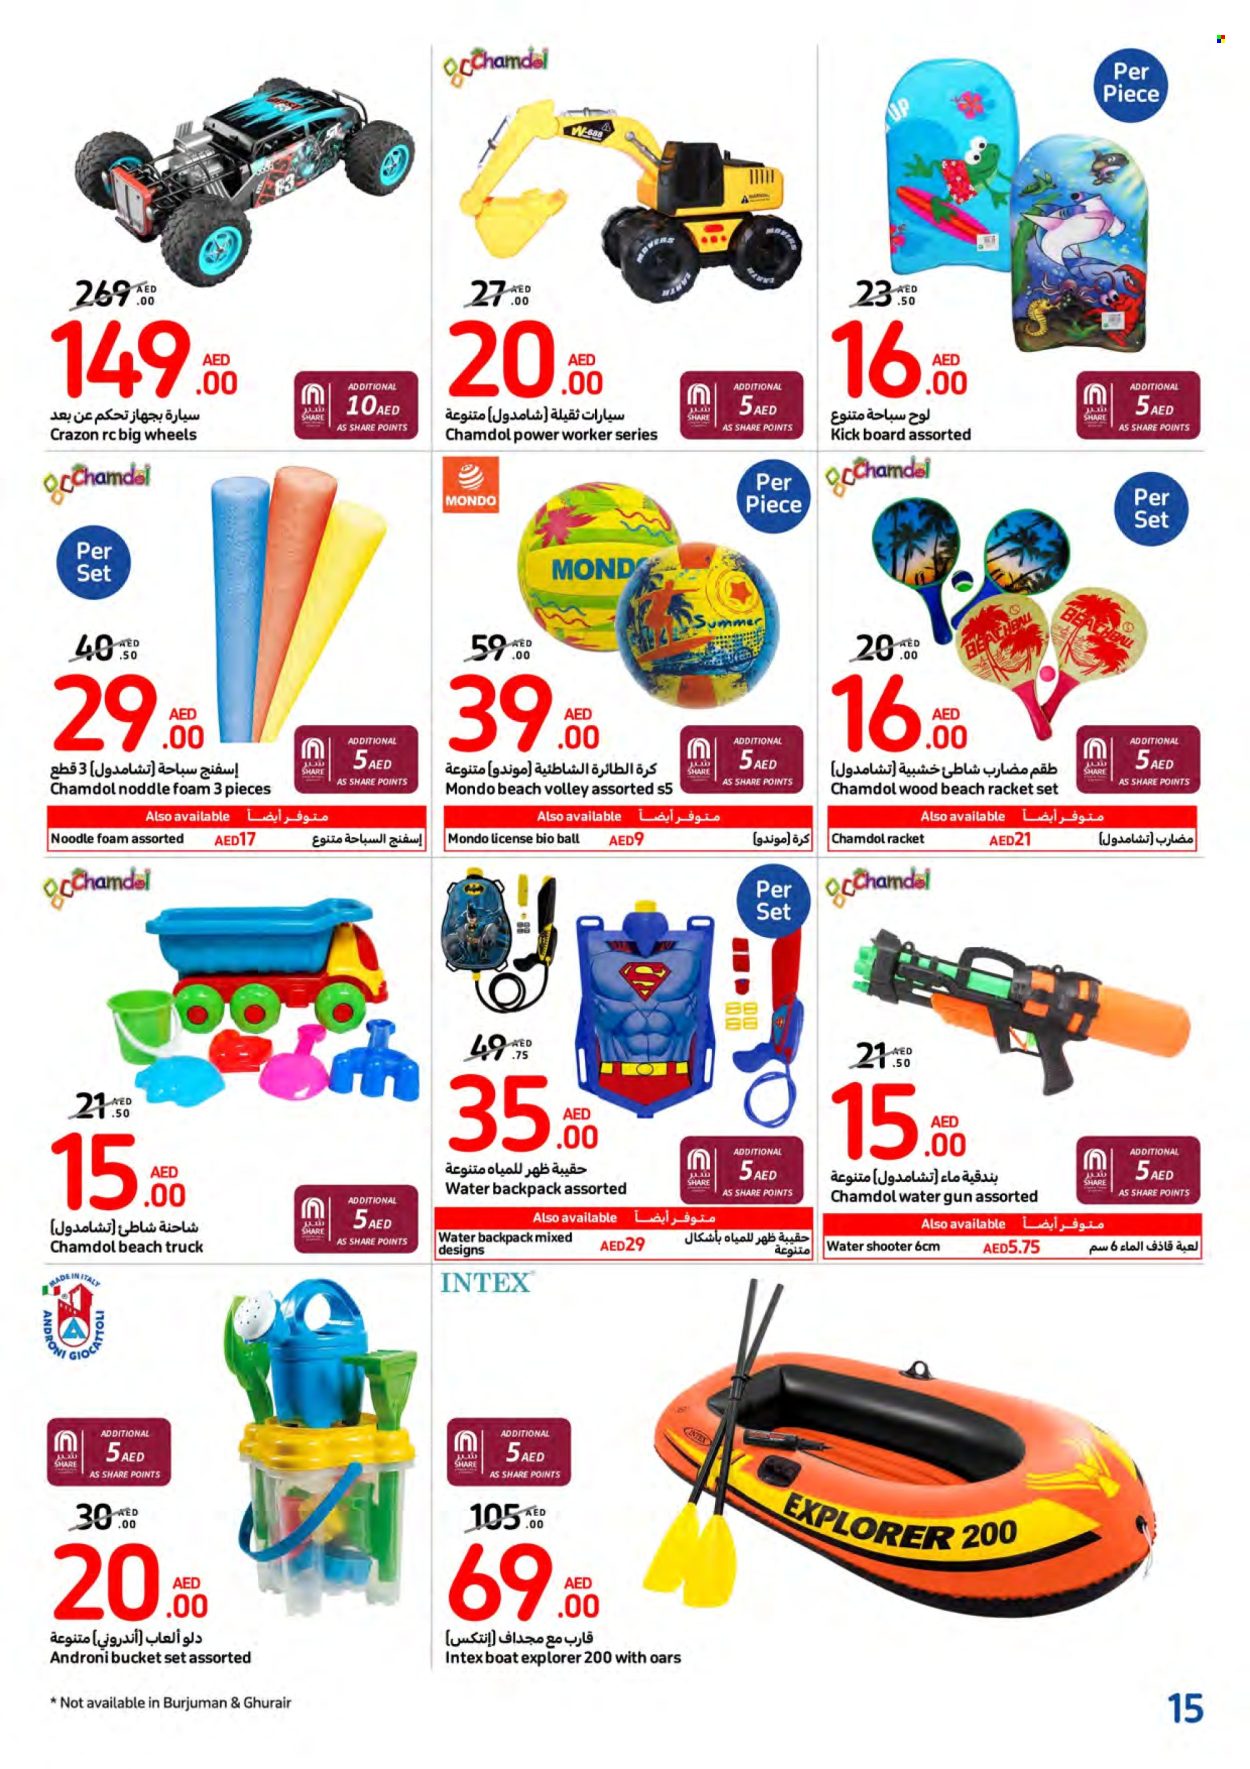 Carrefour offer - 24/04/2024 - 07/05/2024.